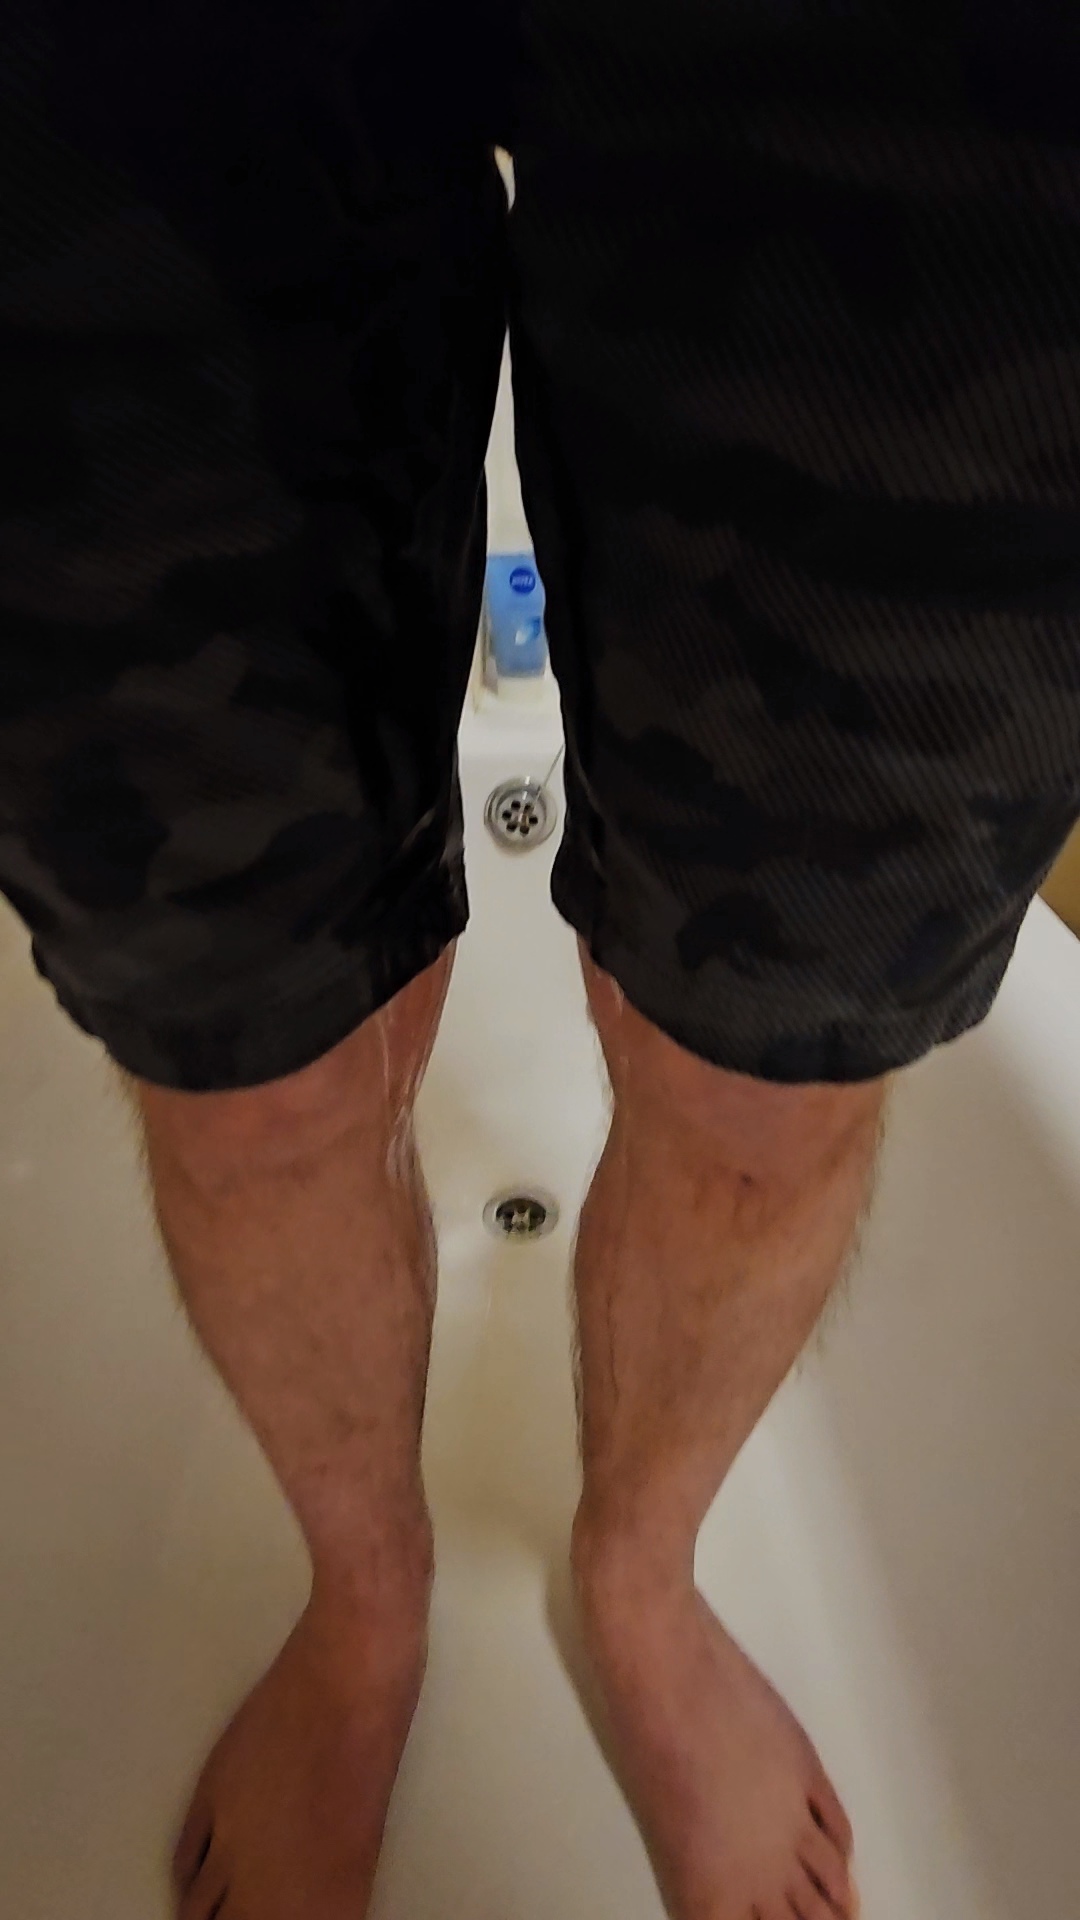 Pissing my shorts after a few beers